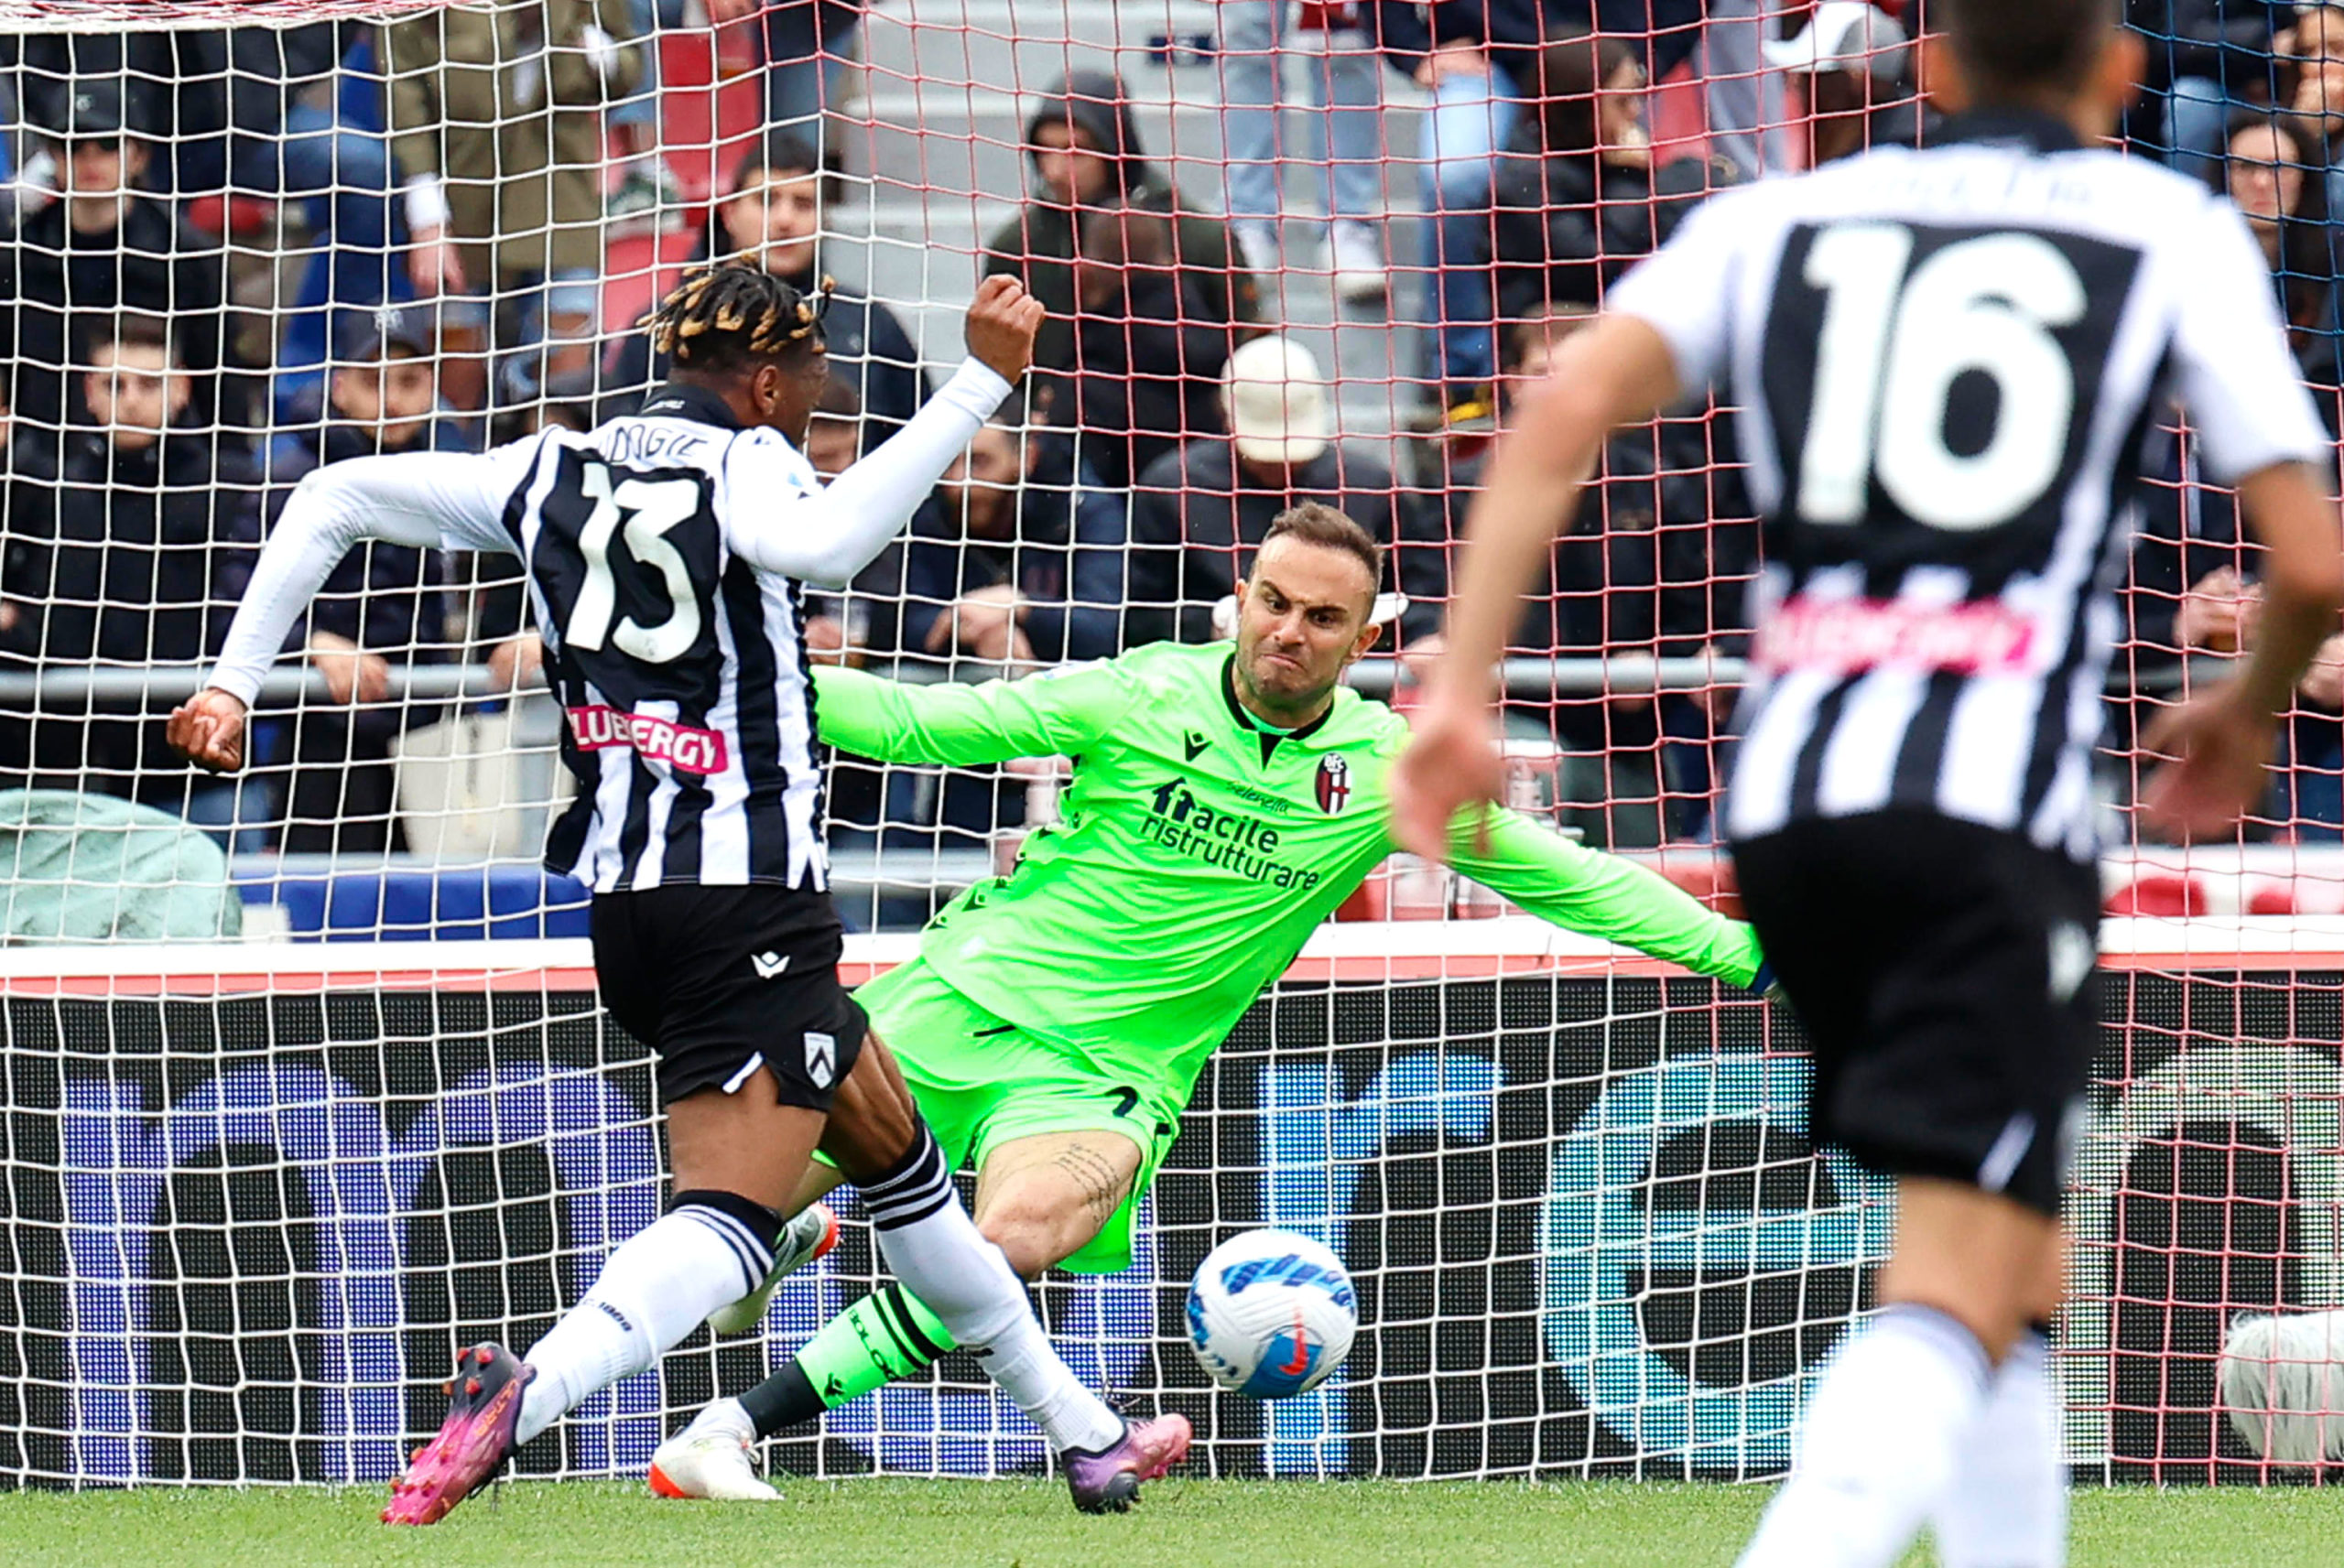 epa09906778 Udinese's Destiny Udogie (L) scores the 1-1 equalizer during the Italian Serie A soccer match between Bologna FC and Udinese Calcio in Bologna, Italy, 24 April 2022. EPA-EFE/ELISABETTA BARACCHI